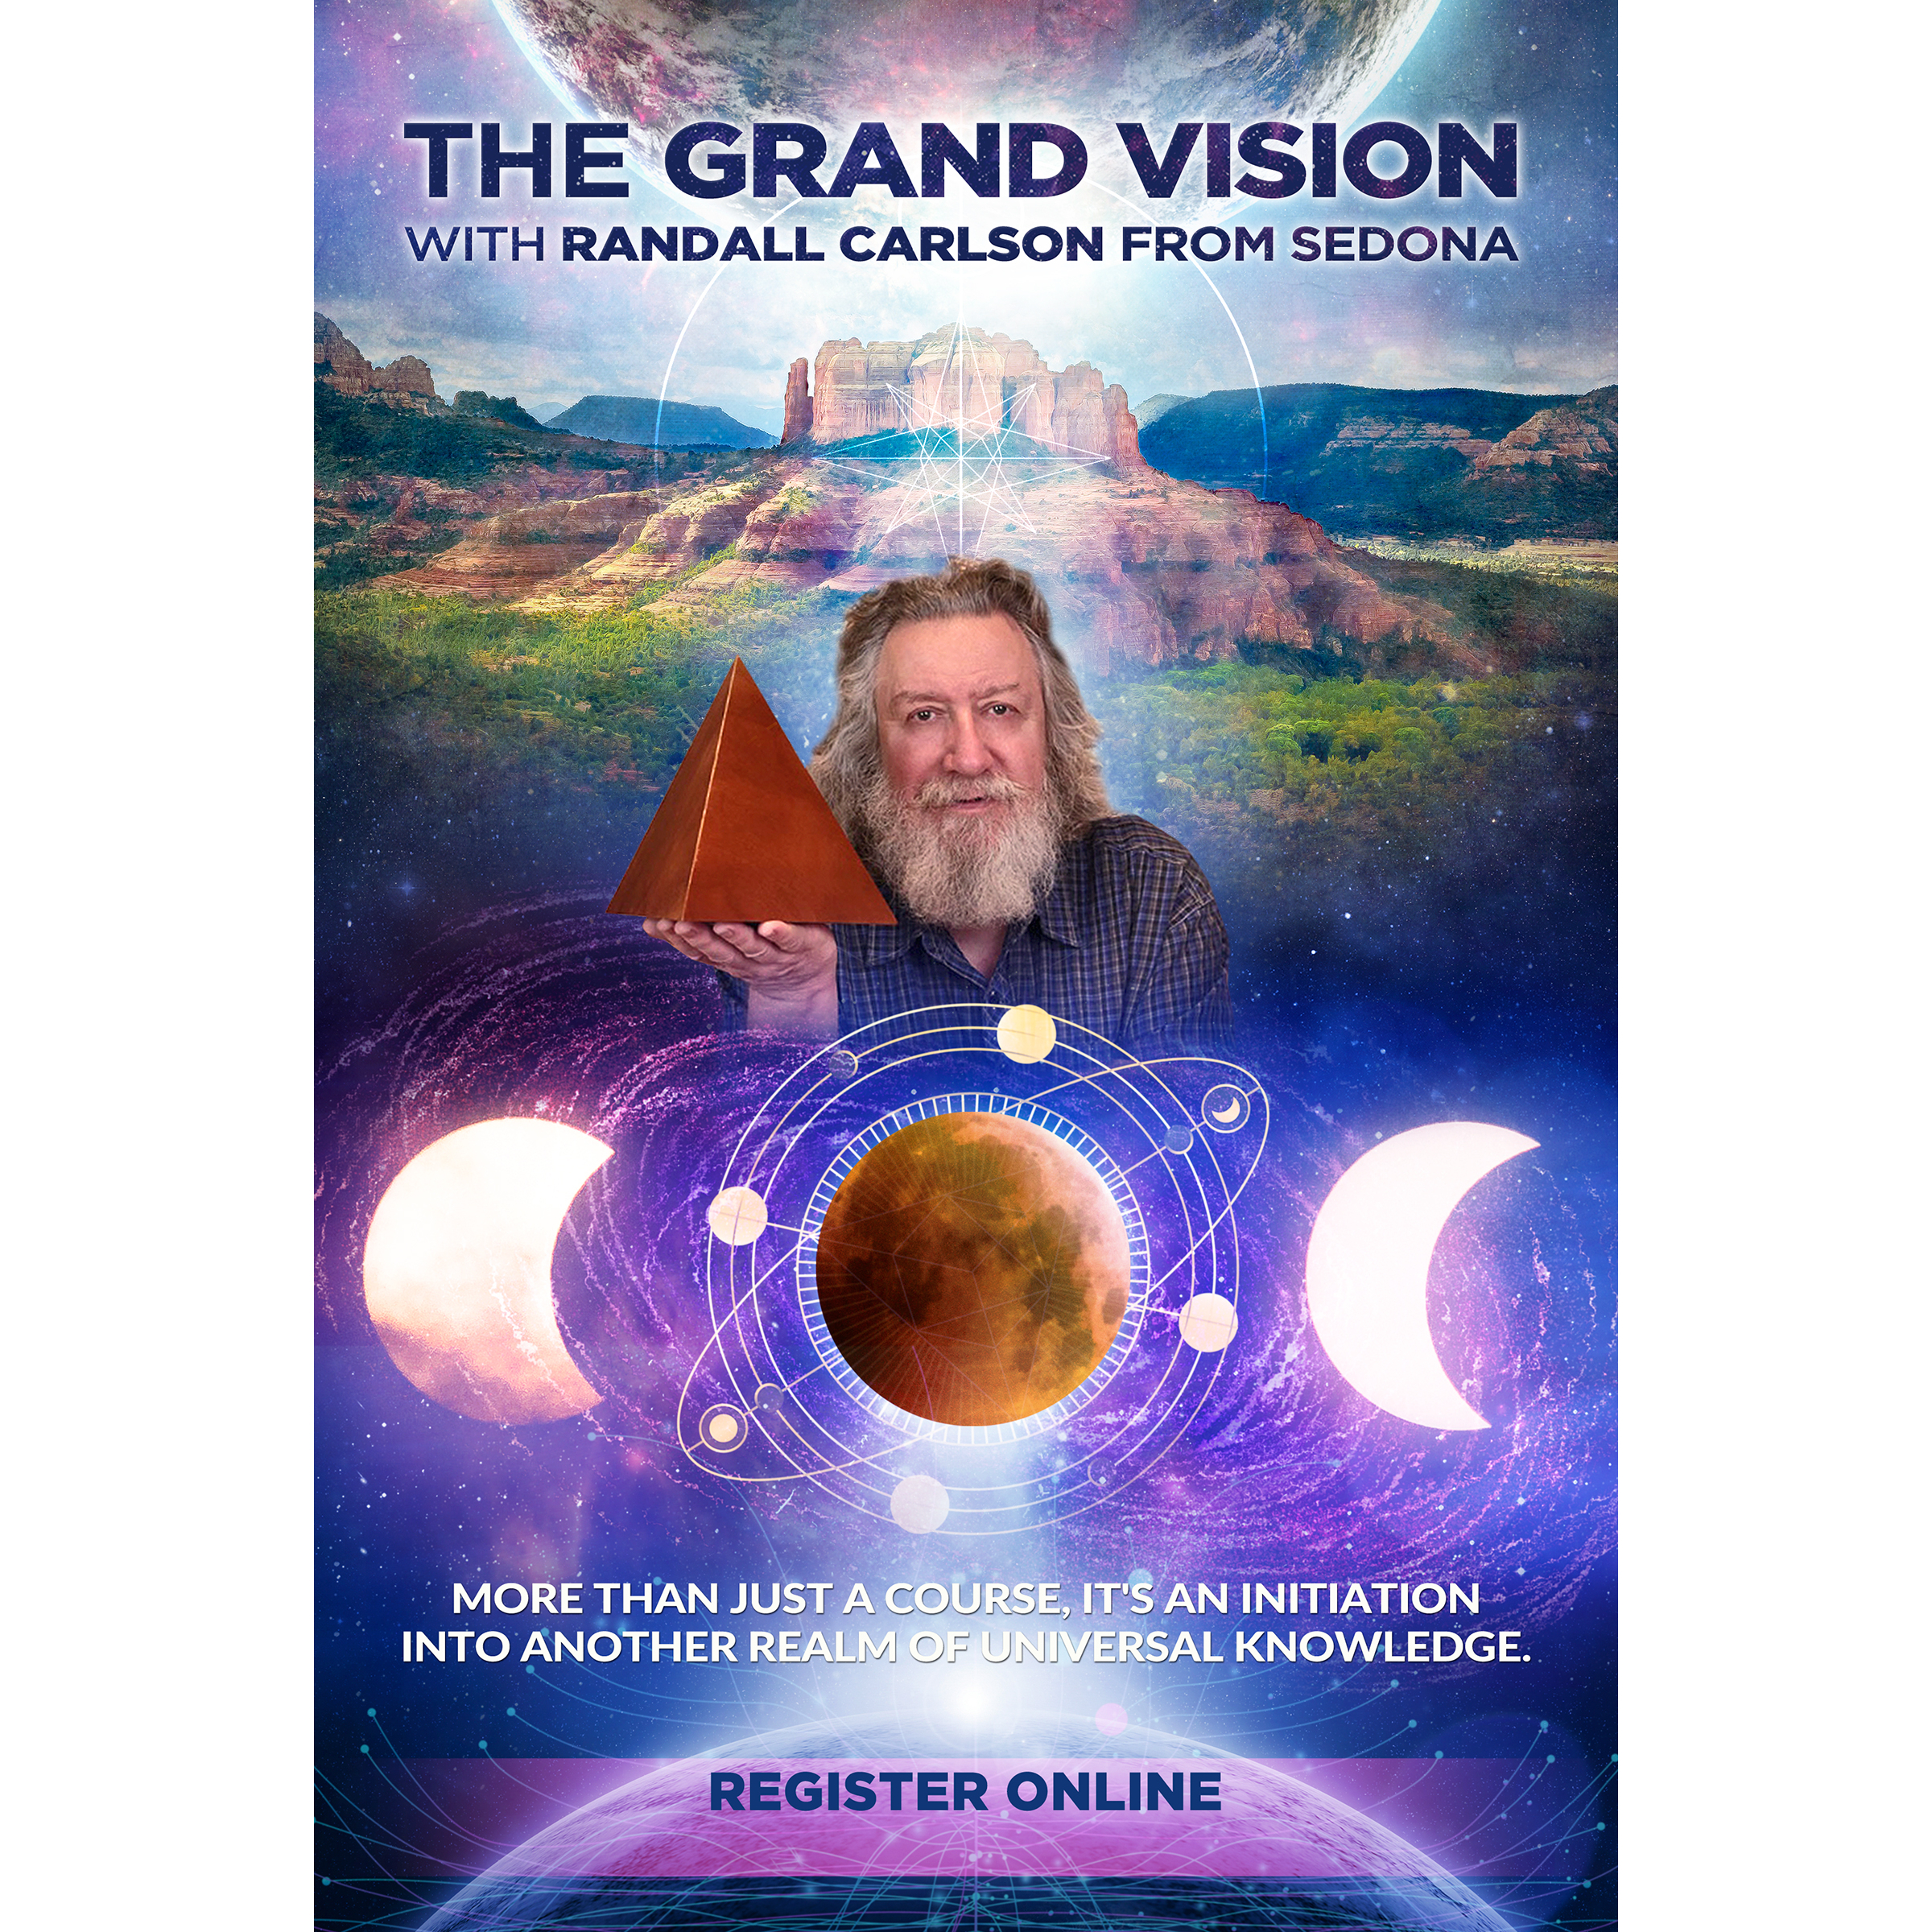 VIP / Meal Ticket / Hotel Randall Carlson in Sedona Earth Day April 22-24, 2022